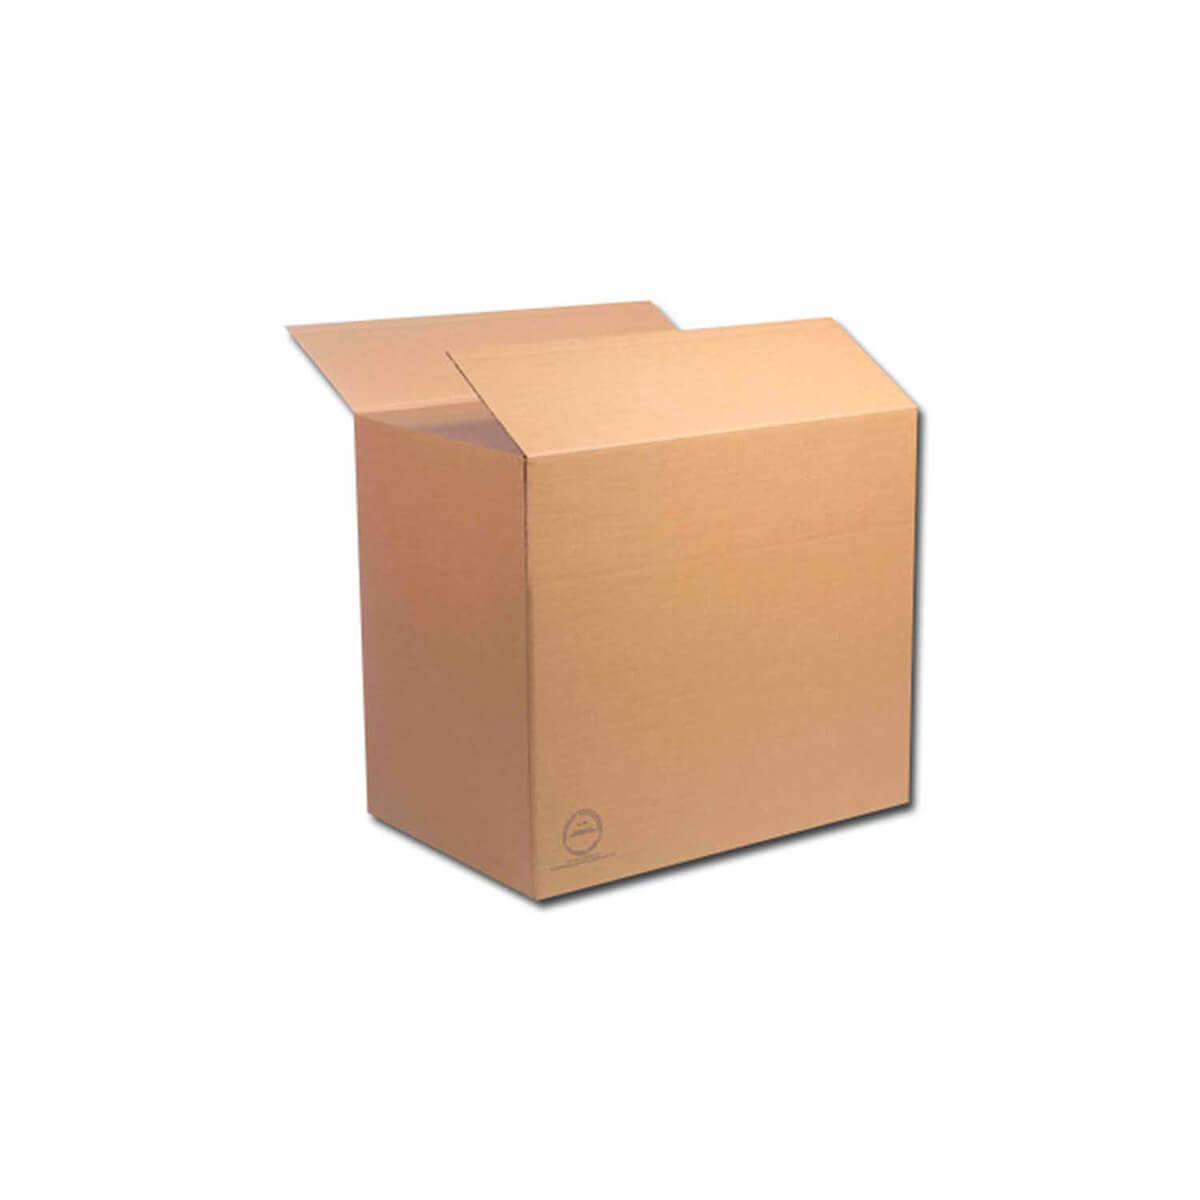 Double wall cardboard container 1180 x 780 x 555 mm